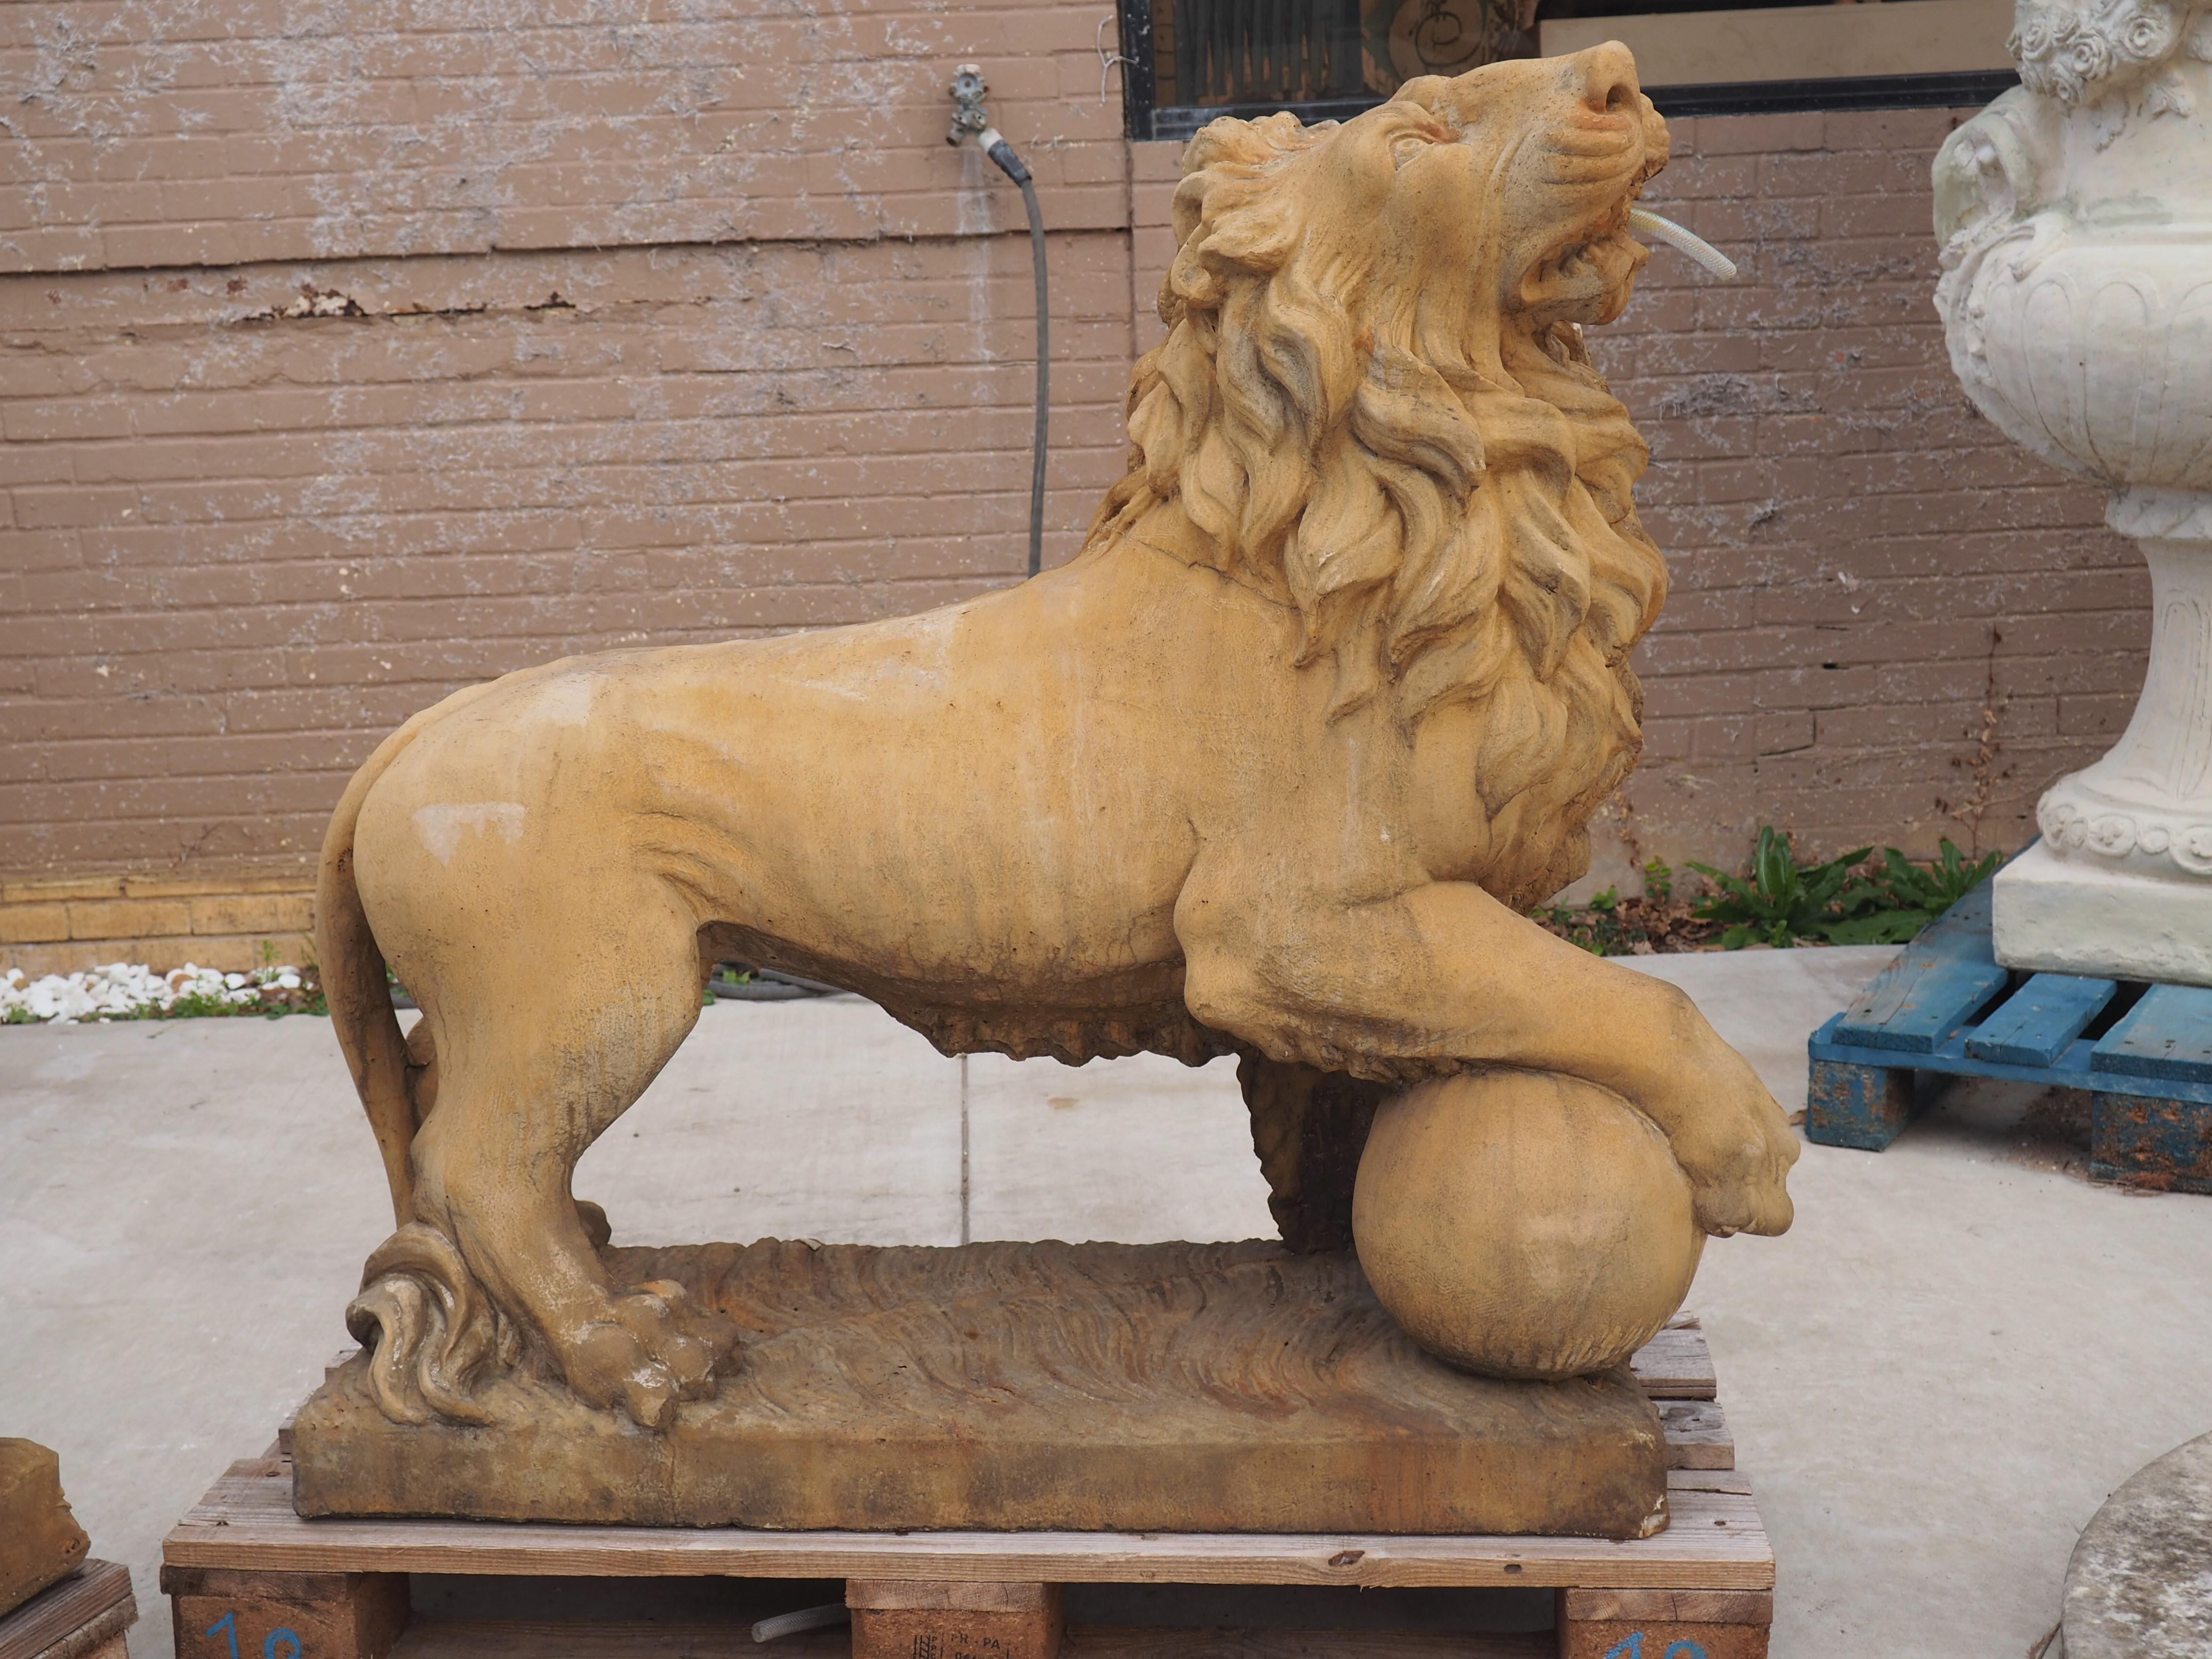 Cast in the style of the famed Medici Lions, these French lion statues have been plumbed for use as fountain elements. The large lions are mirror images, with one lion having a ball under its left forepaw, while the other one has a ball under its